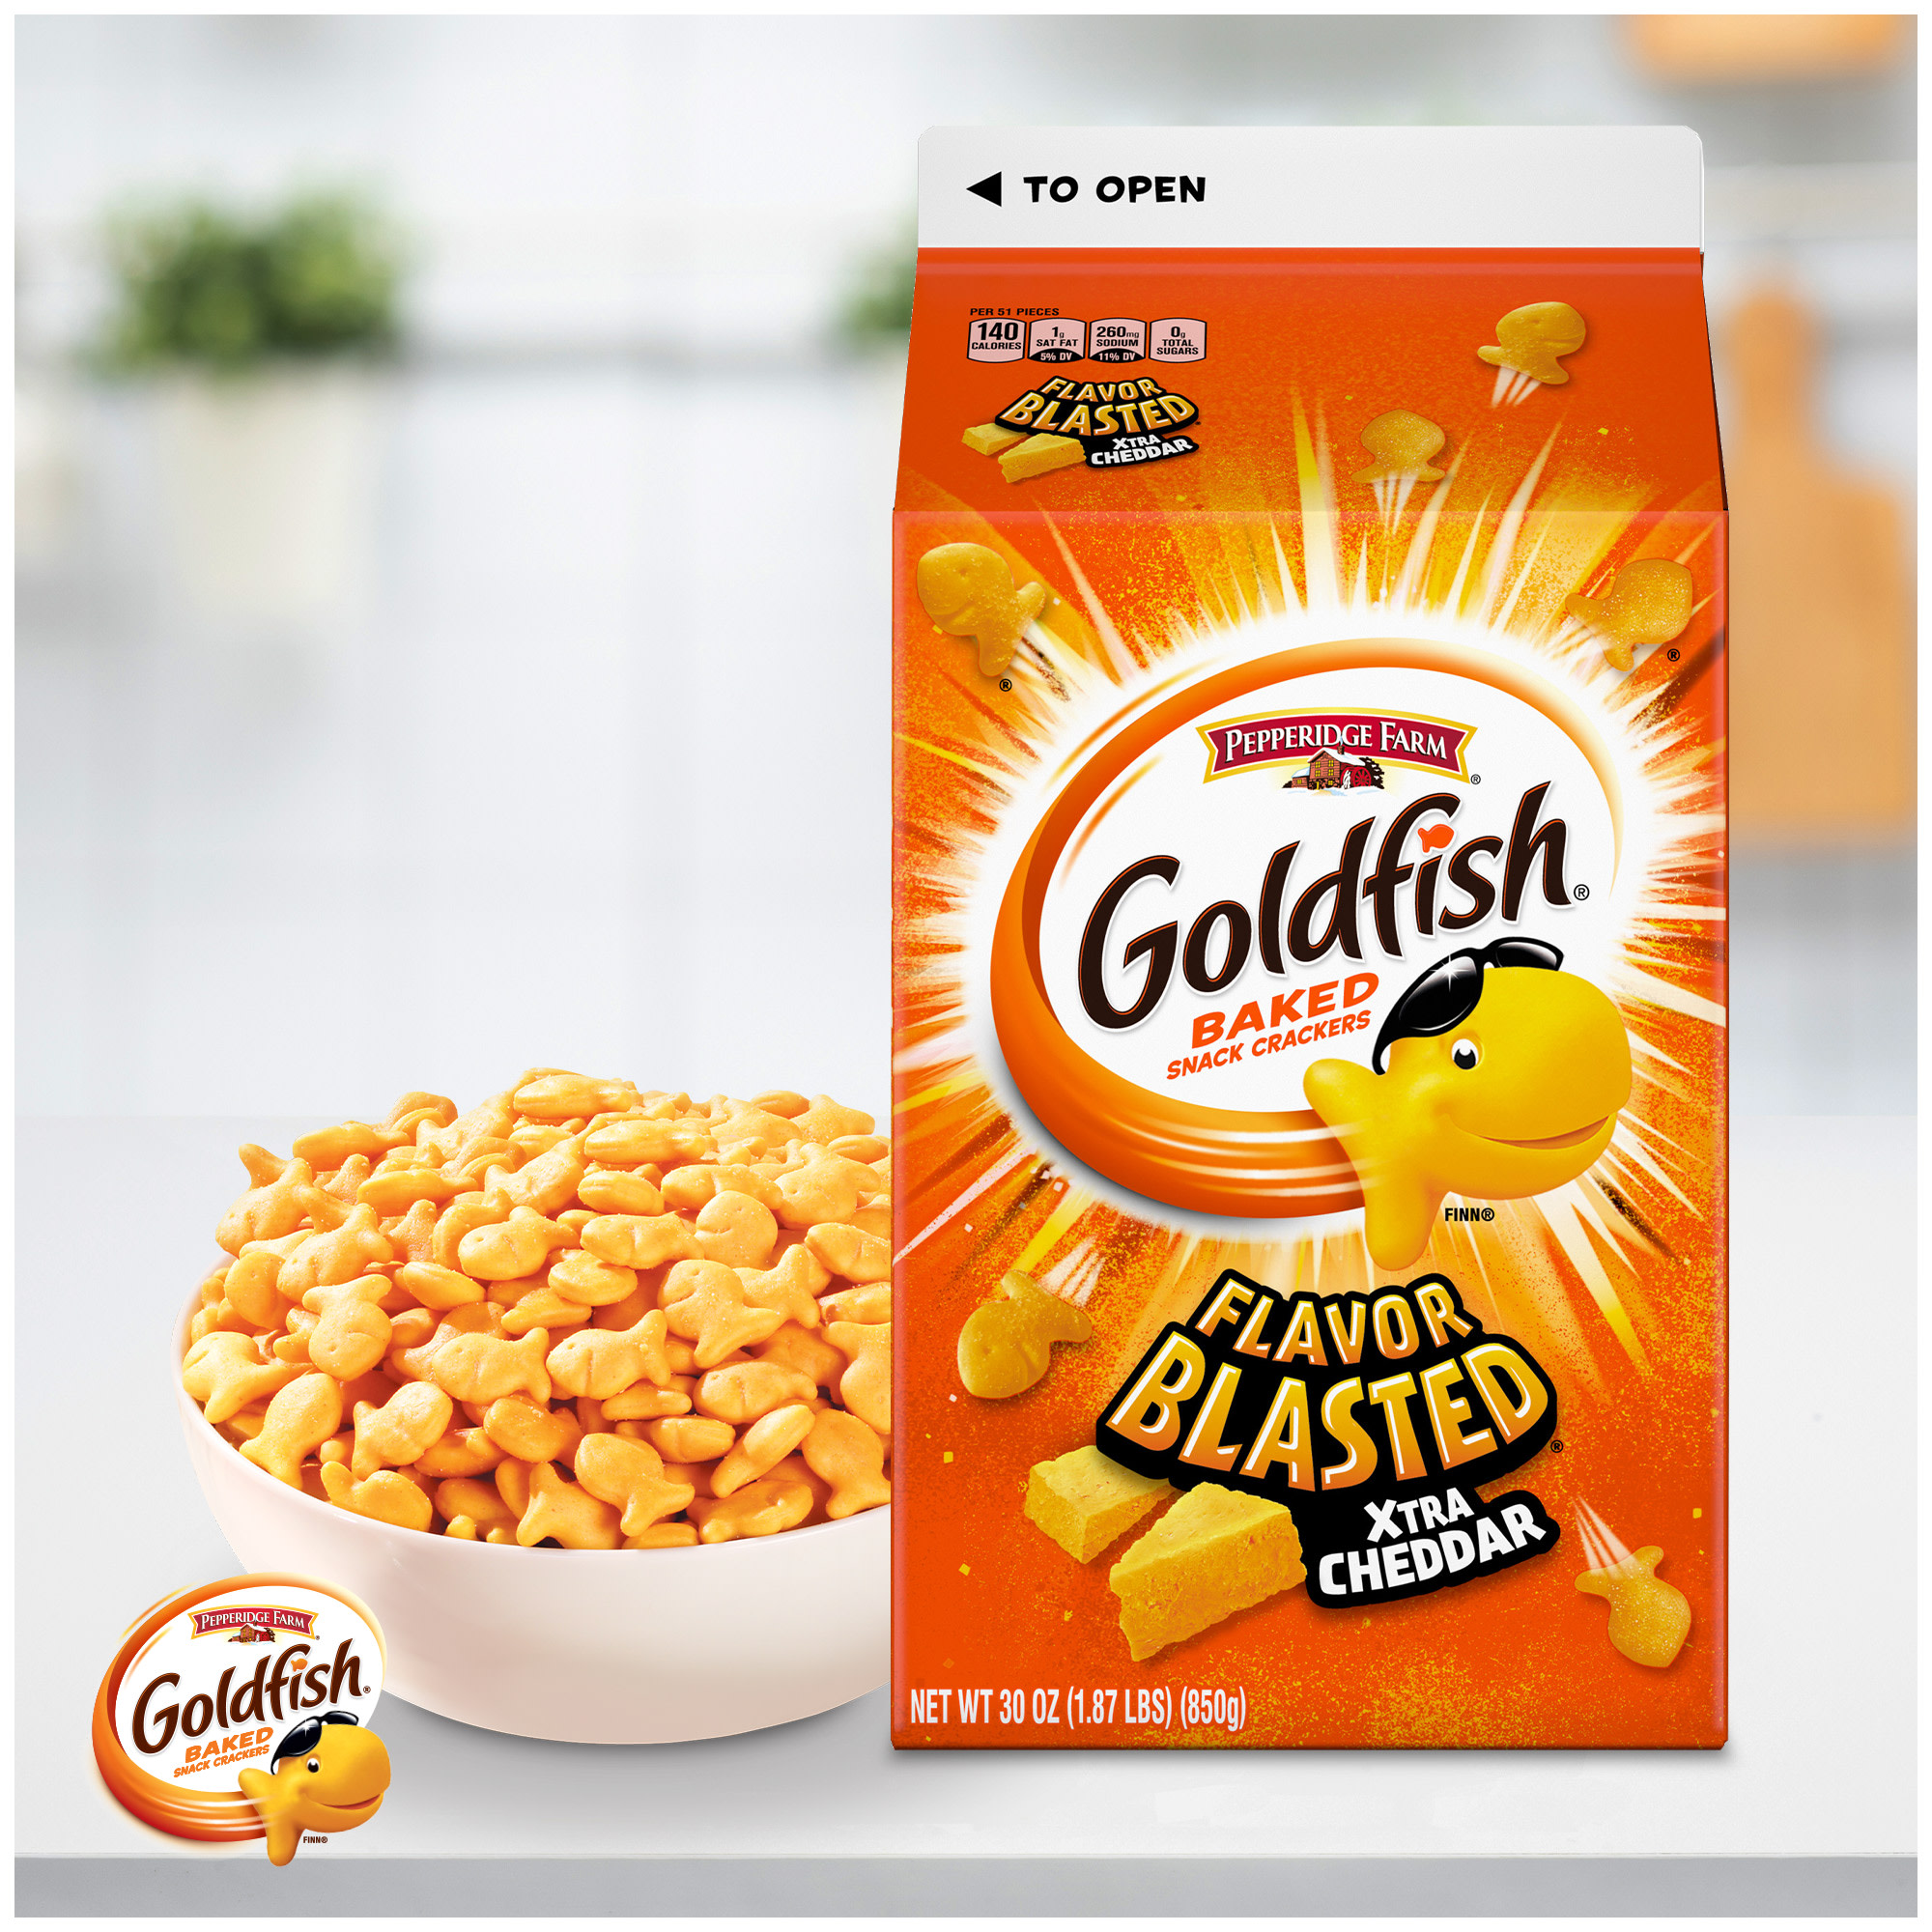 Goldfish Flavor Blasted Xtra Cheddar Cheese Crackers, Baked Snack Crackers, 30 oz Carton - image 4 of 12